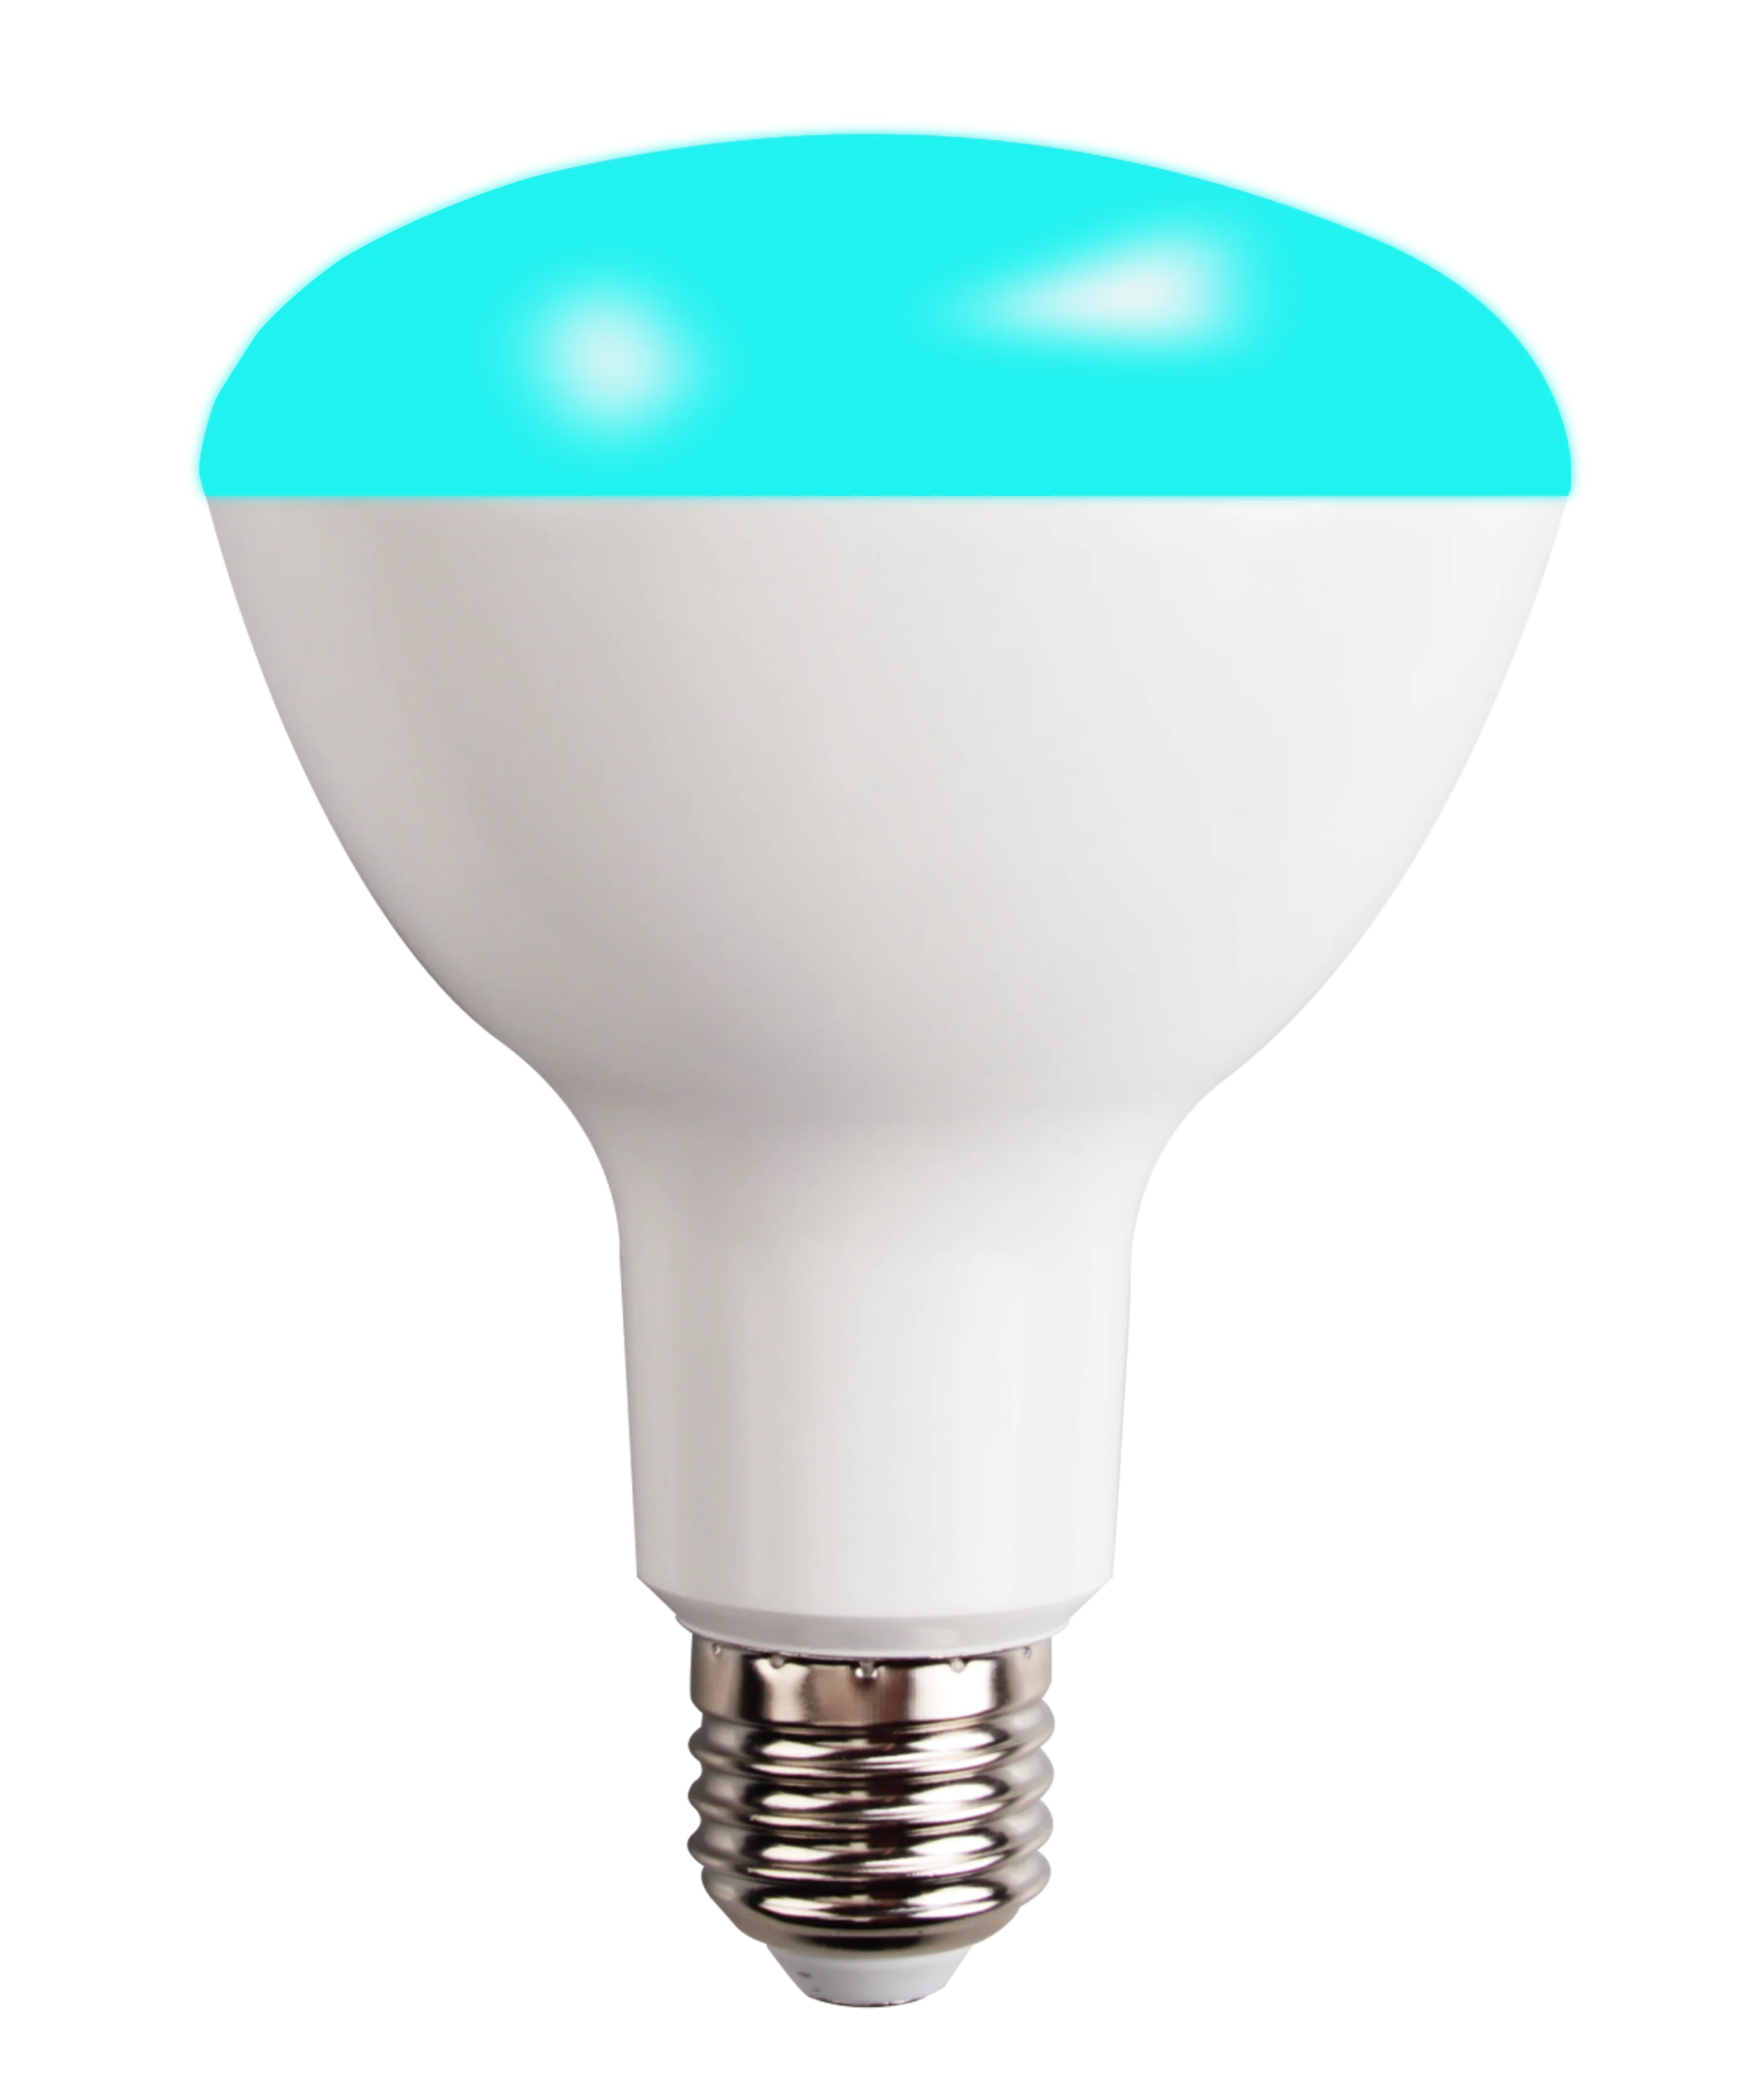 Banqcn  Smart Light Bulb Works with Alexa & Google (No Hub Required), Color Changing Wi-Fi BR30  LED Lamp Bulb, 9W